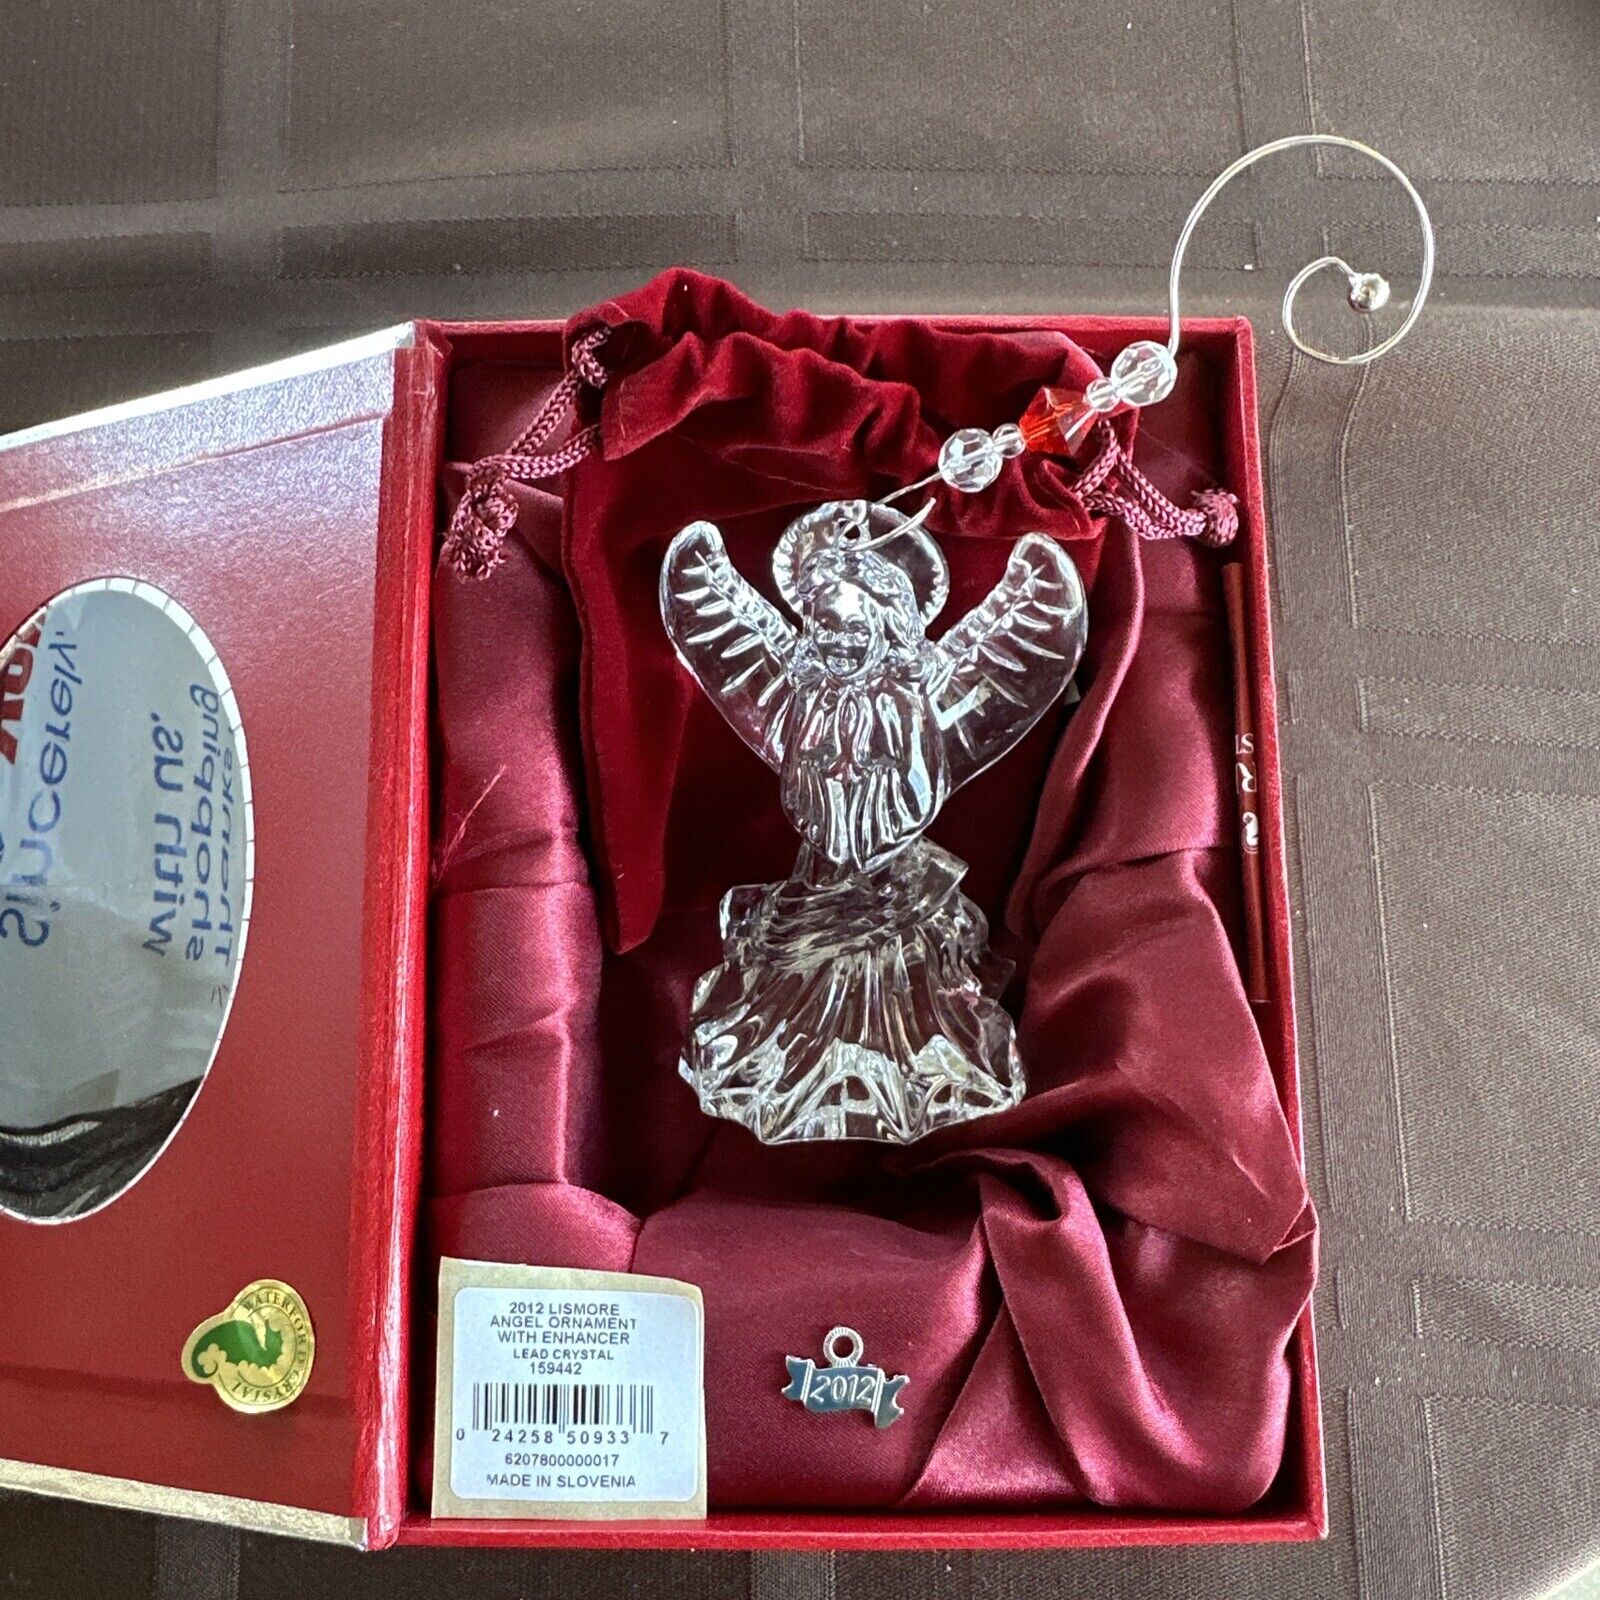 Waterford Crystal 2012 Lismore Angel Ornament Christmas #159442 PREOWNED